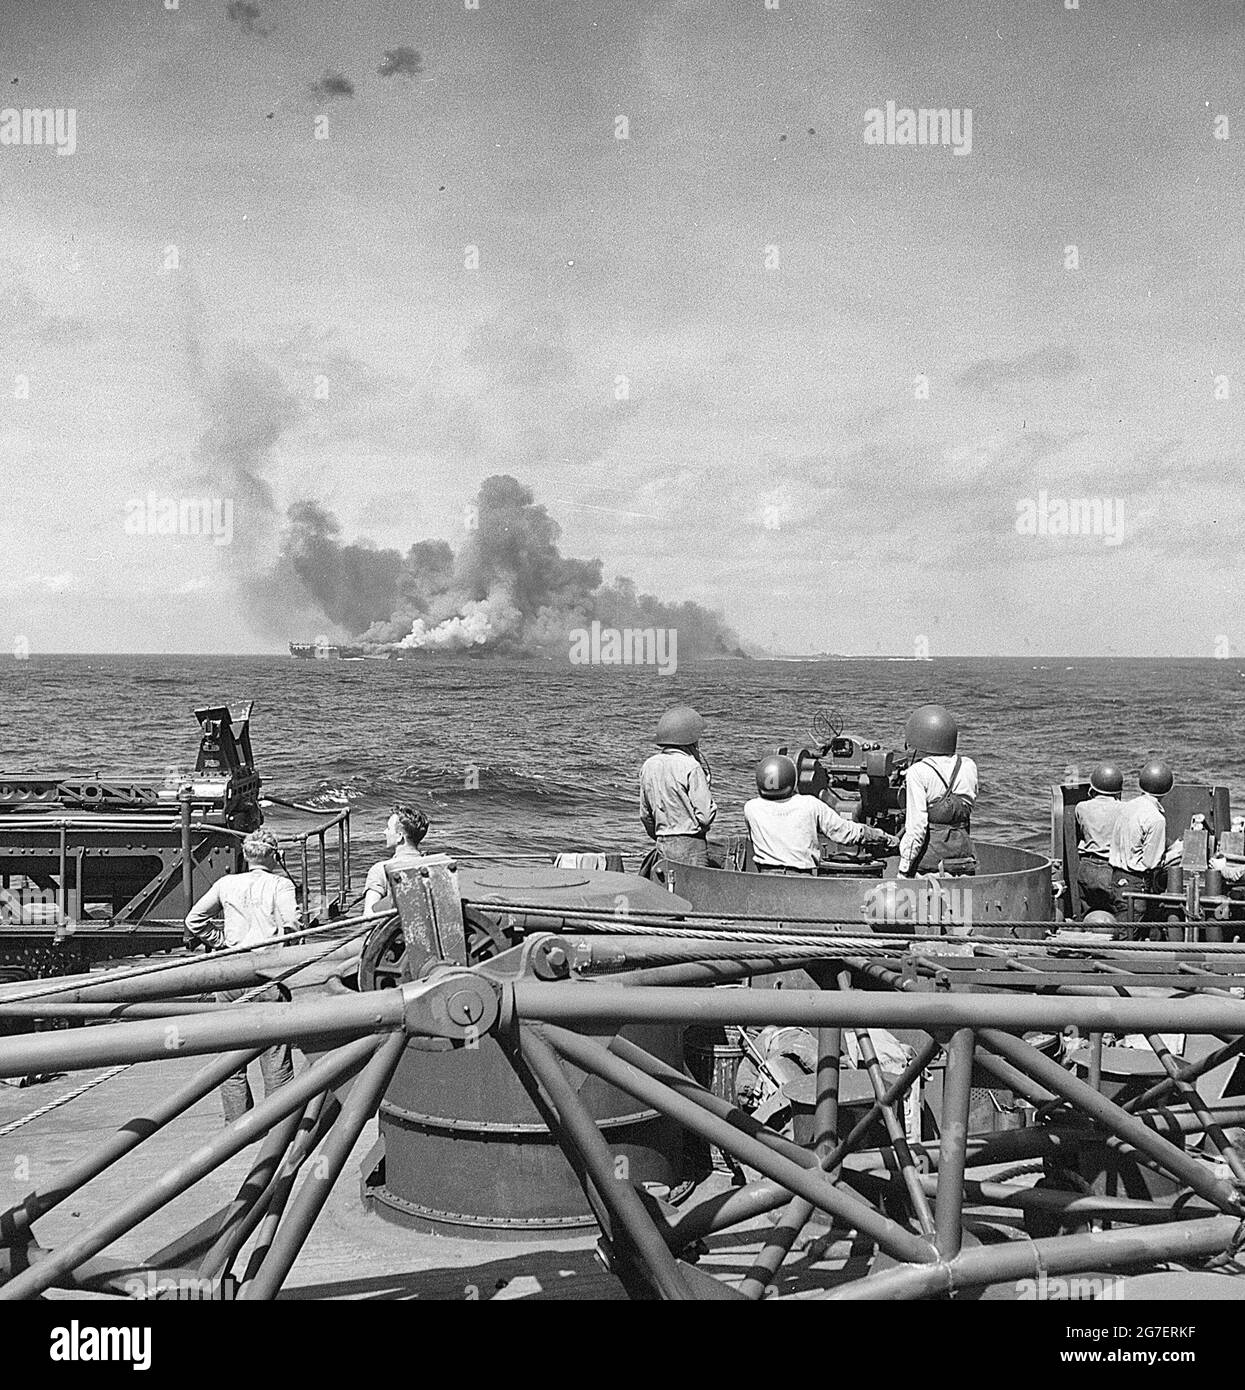 USS Intrepid (CV-11) after being hit by Japanese plane in suicide dive in the Pacific. Taken from USS New Jersey (BB-62). Smoke coming from USS Intrepid (CV-11) gunners at 40mm guns on board USS New Jersey (BB-62) in foreground Stock Photo